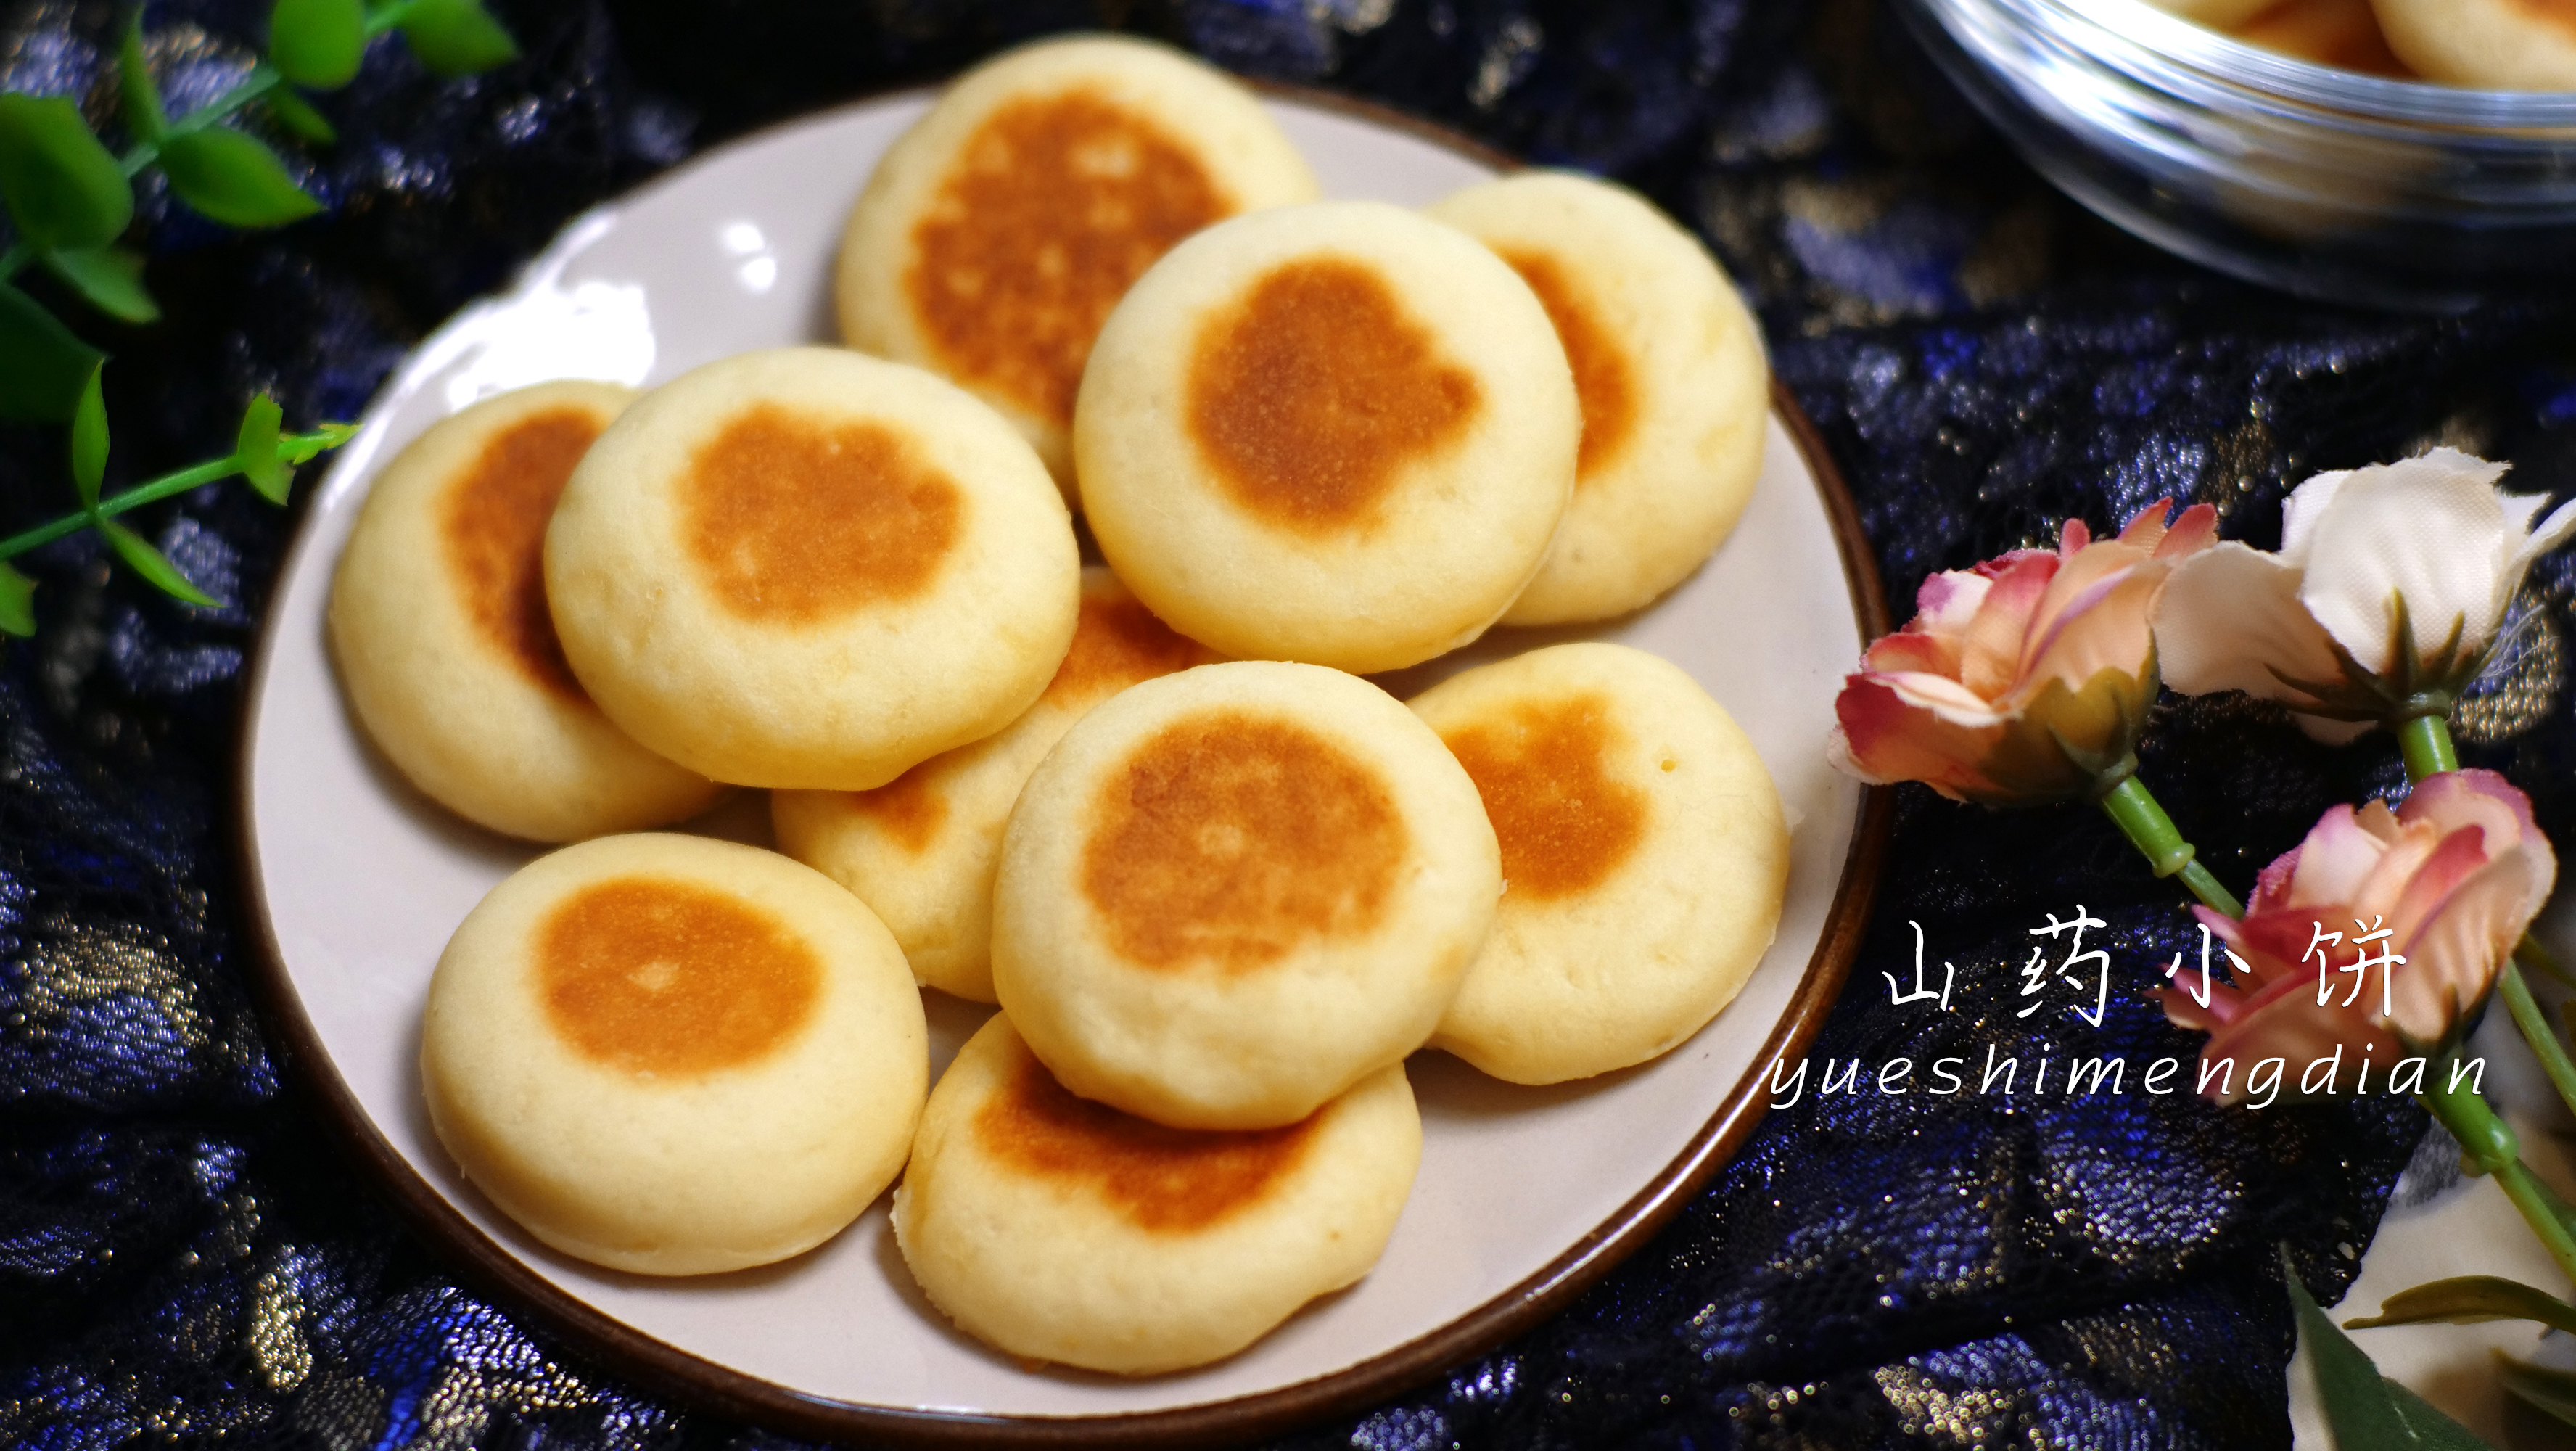 
Yam small cake -- darling be good at the practice of cake of the lienal breakfast that raise a stomach